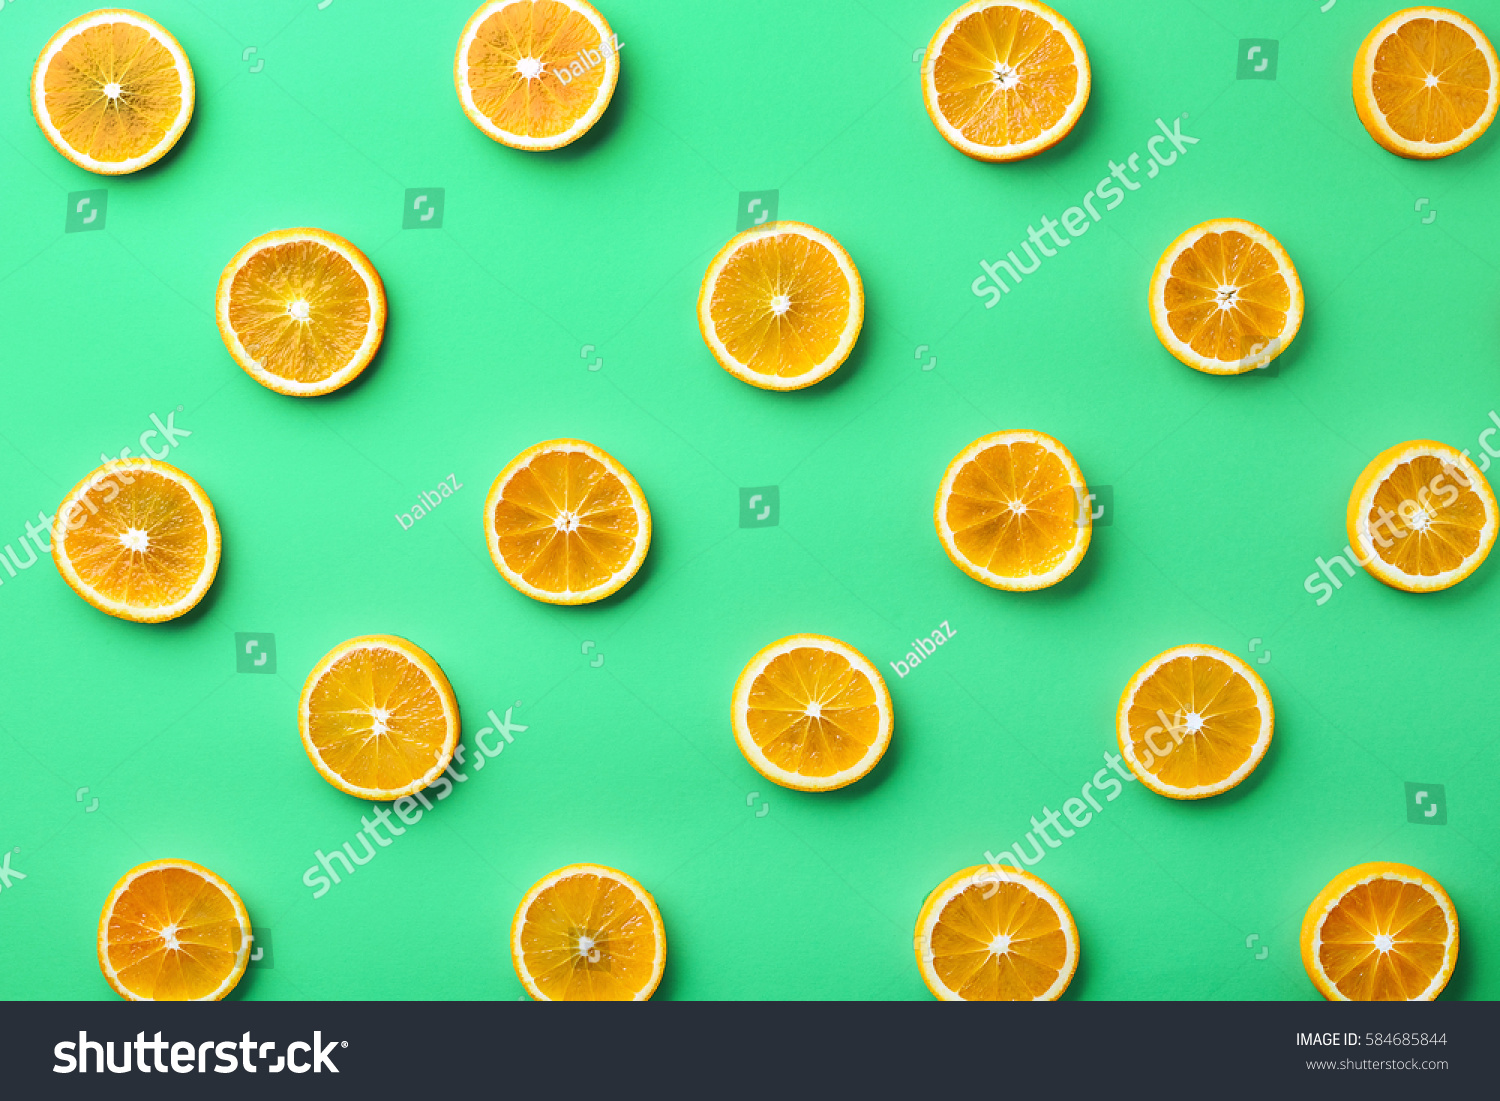 Colorful fruit pattern of fresh orange slices on green background. From top view #584685844